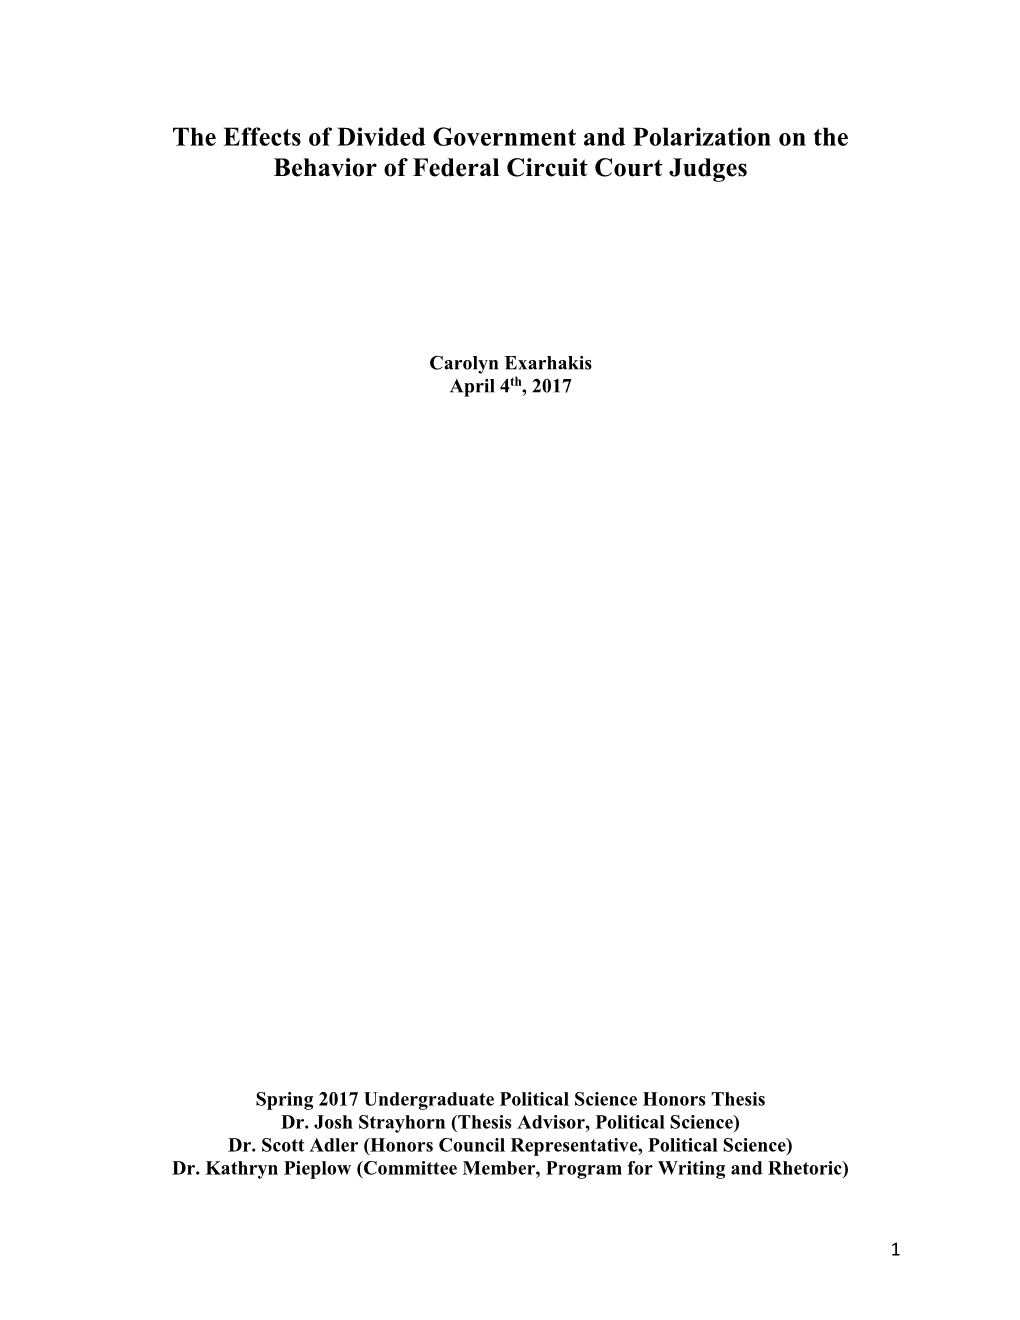 The Effects of Divided Government and Polarization on the Behavior of Federal Circuit Court Judges